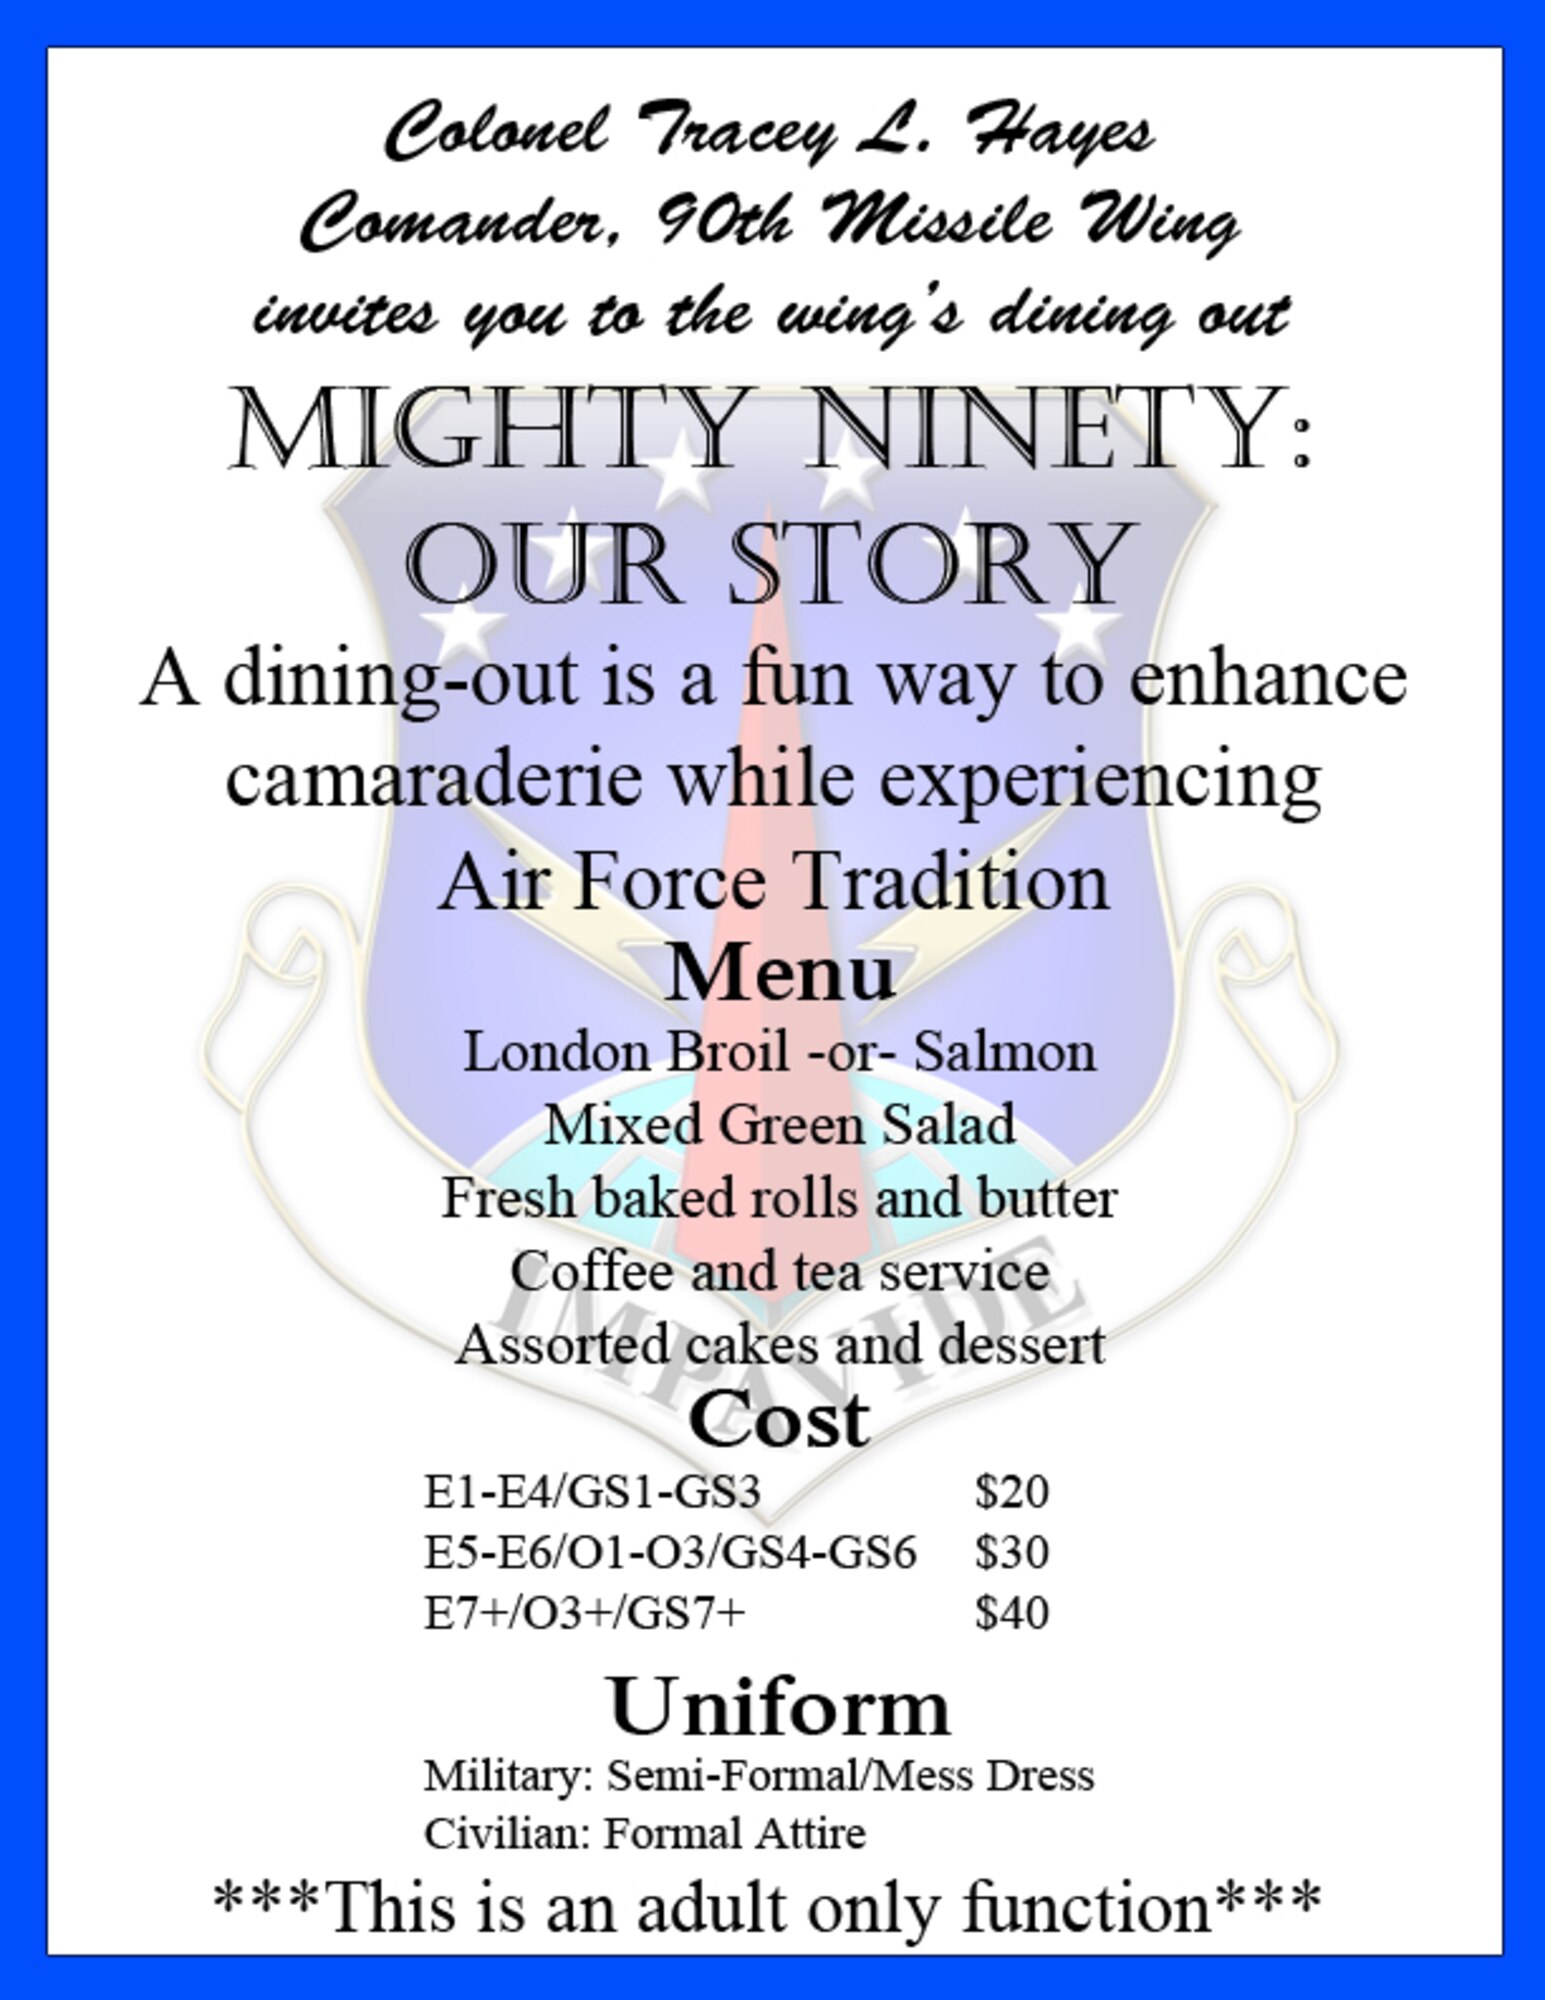 90th Missile Wing 2015 Dining-out Flyer